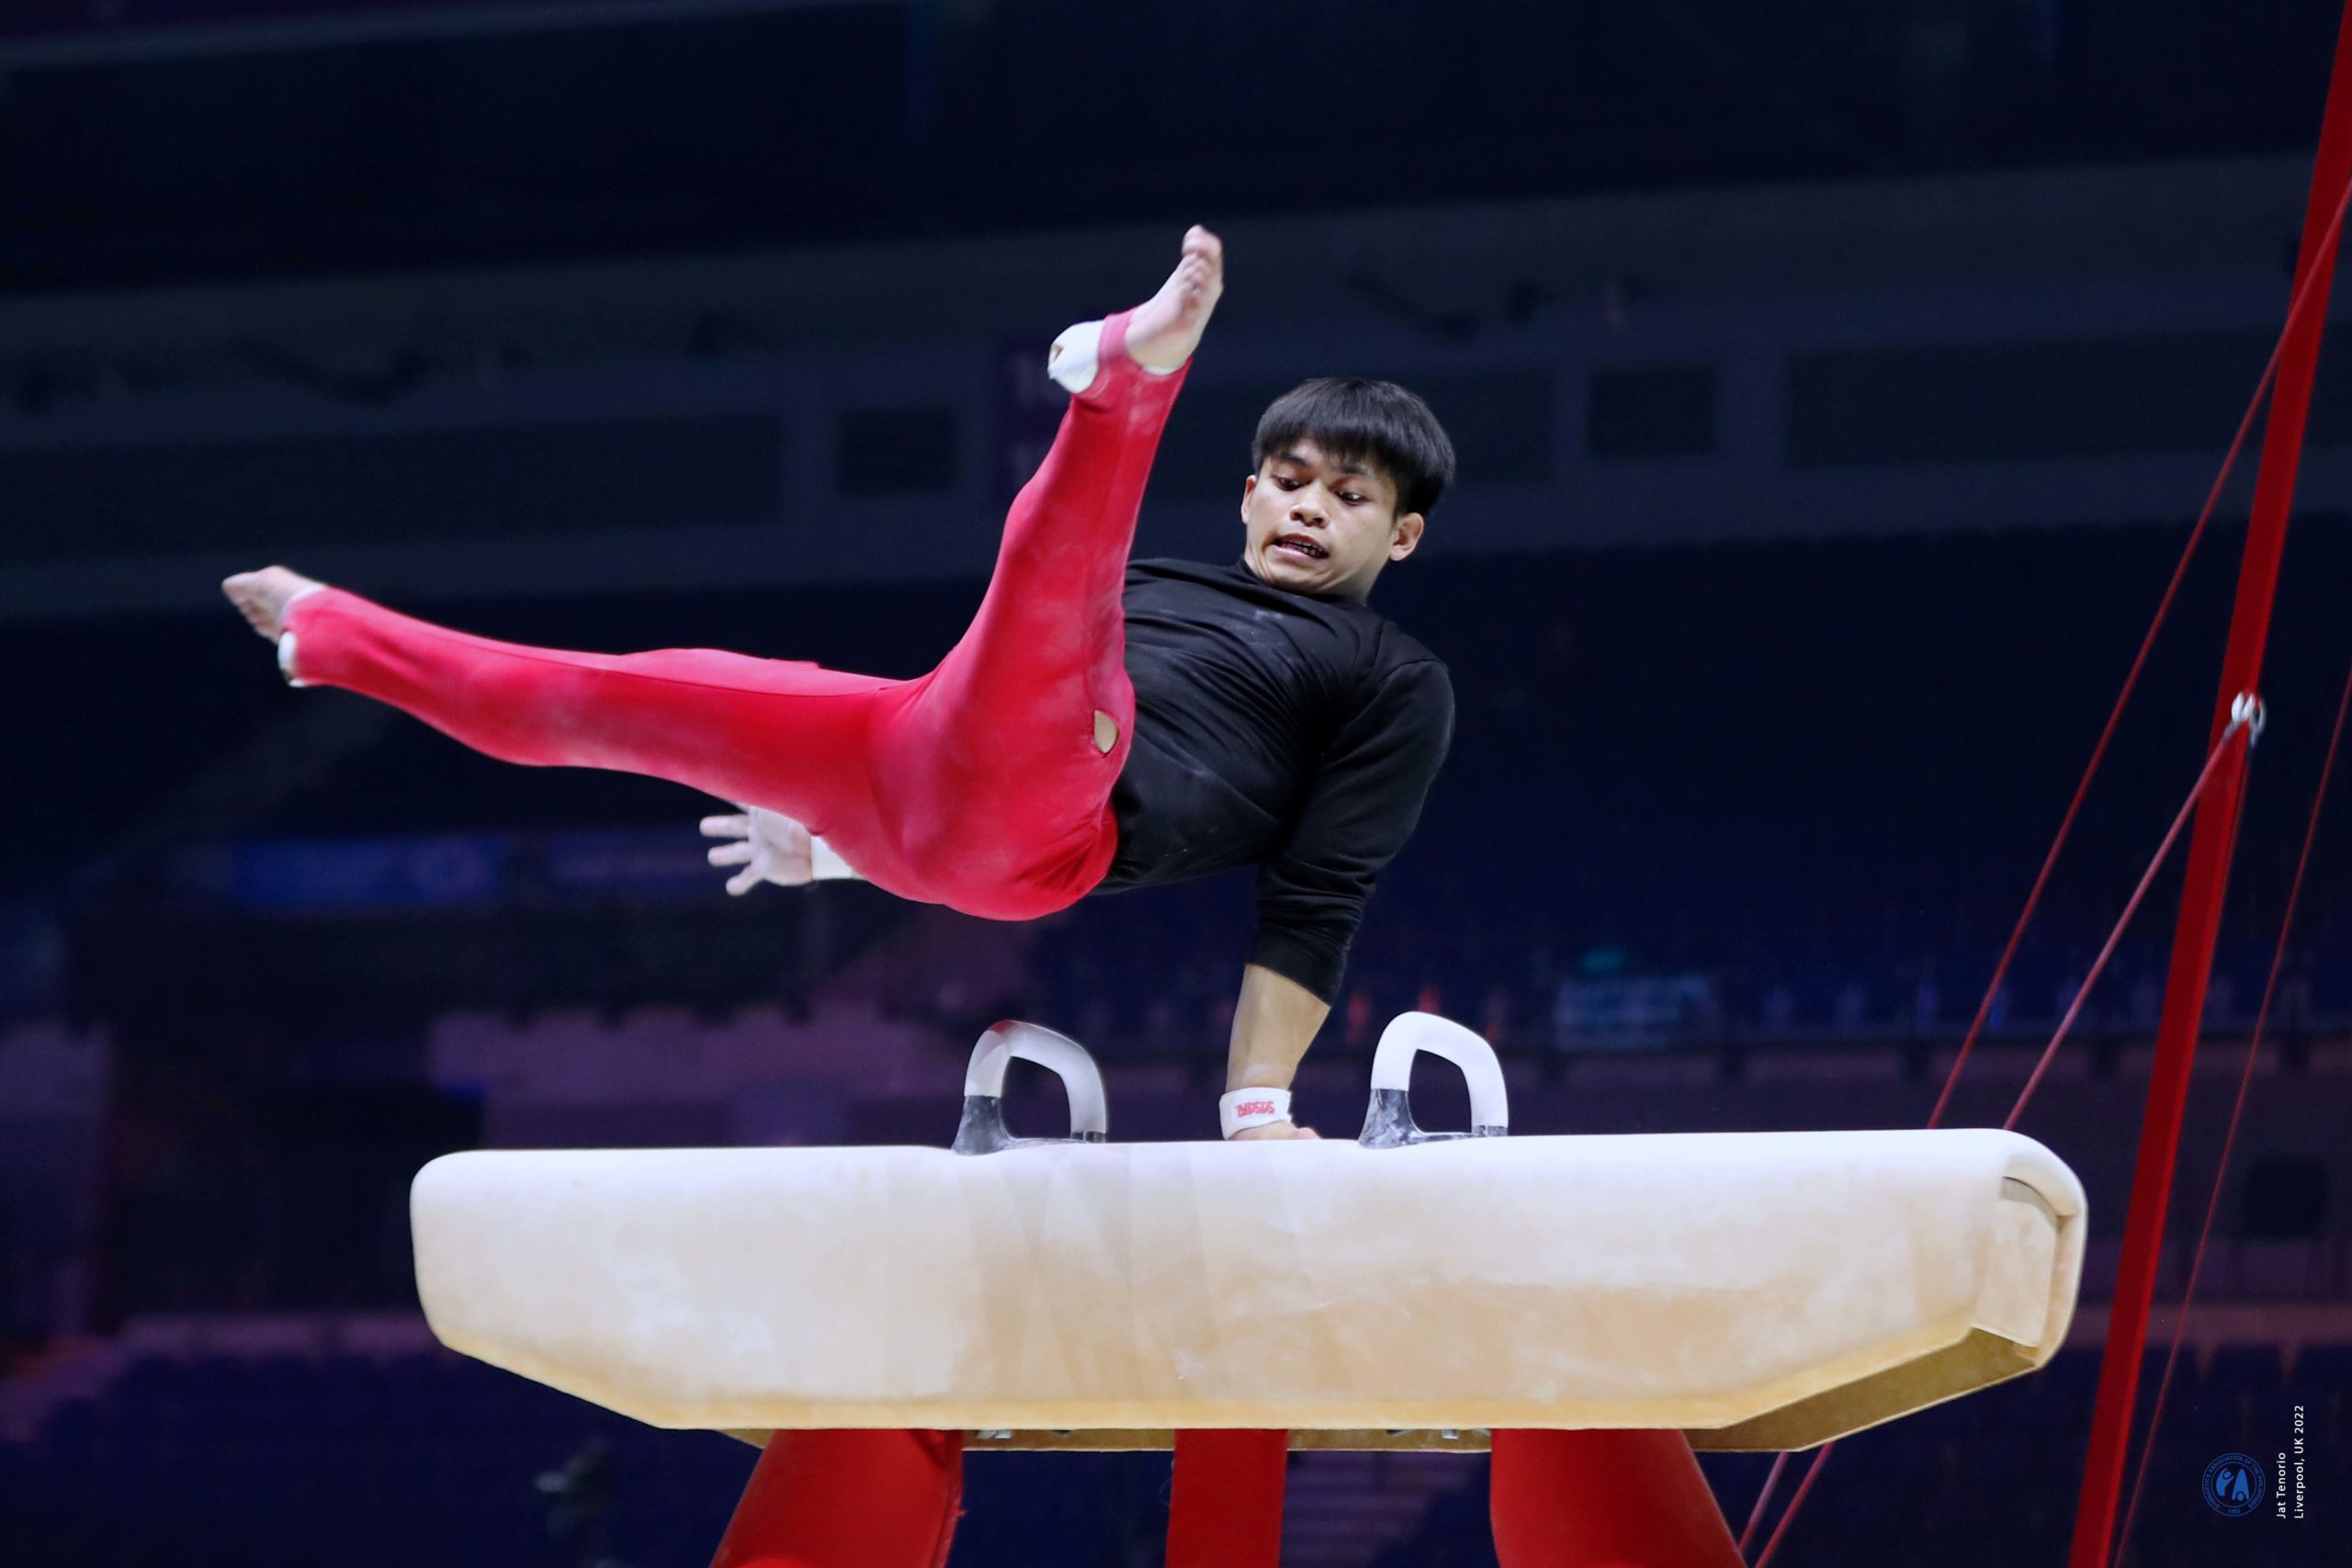 Filipino ace Carlos Yulo works on his pommel horse routine on the eve of opening night. —CONTRIBUTED PHOTO